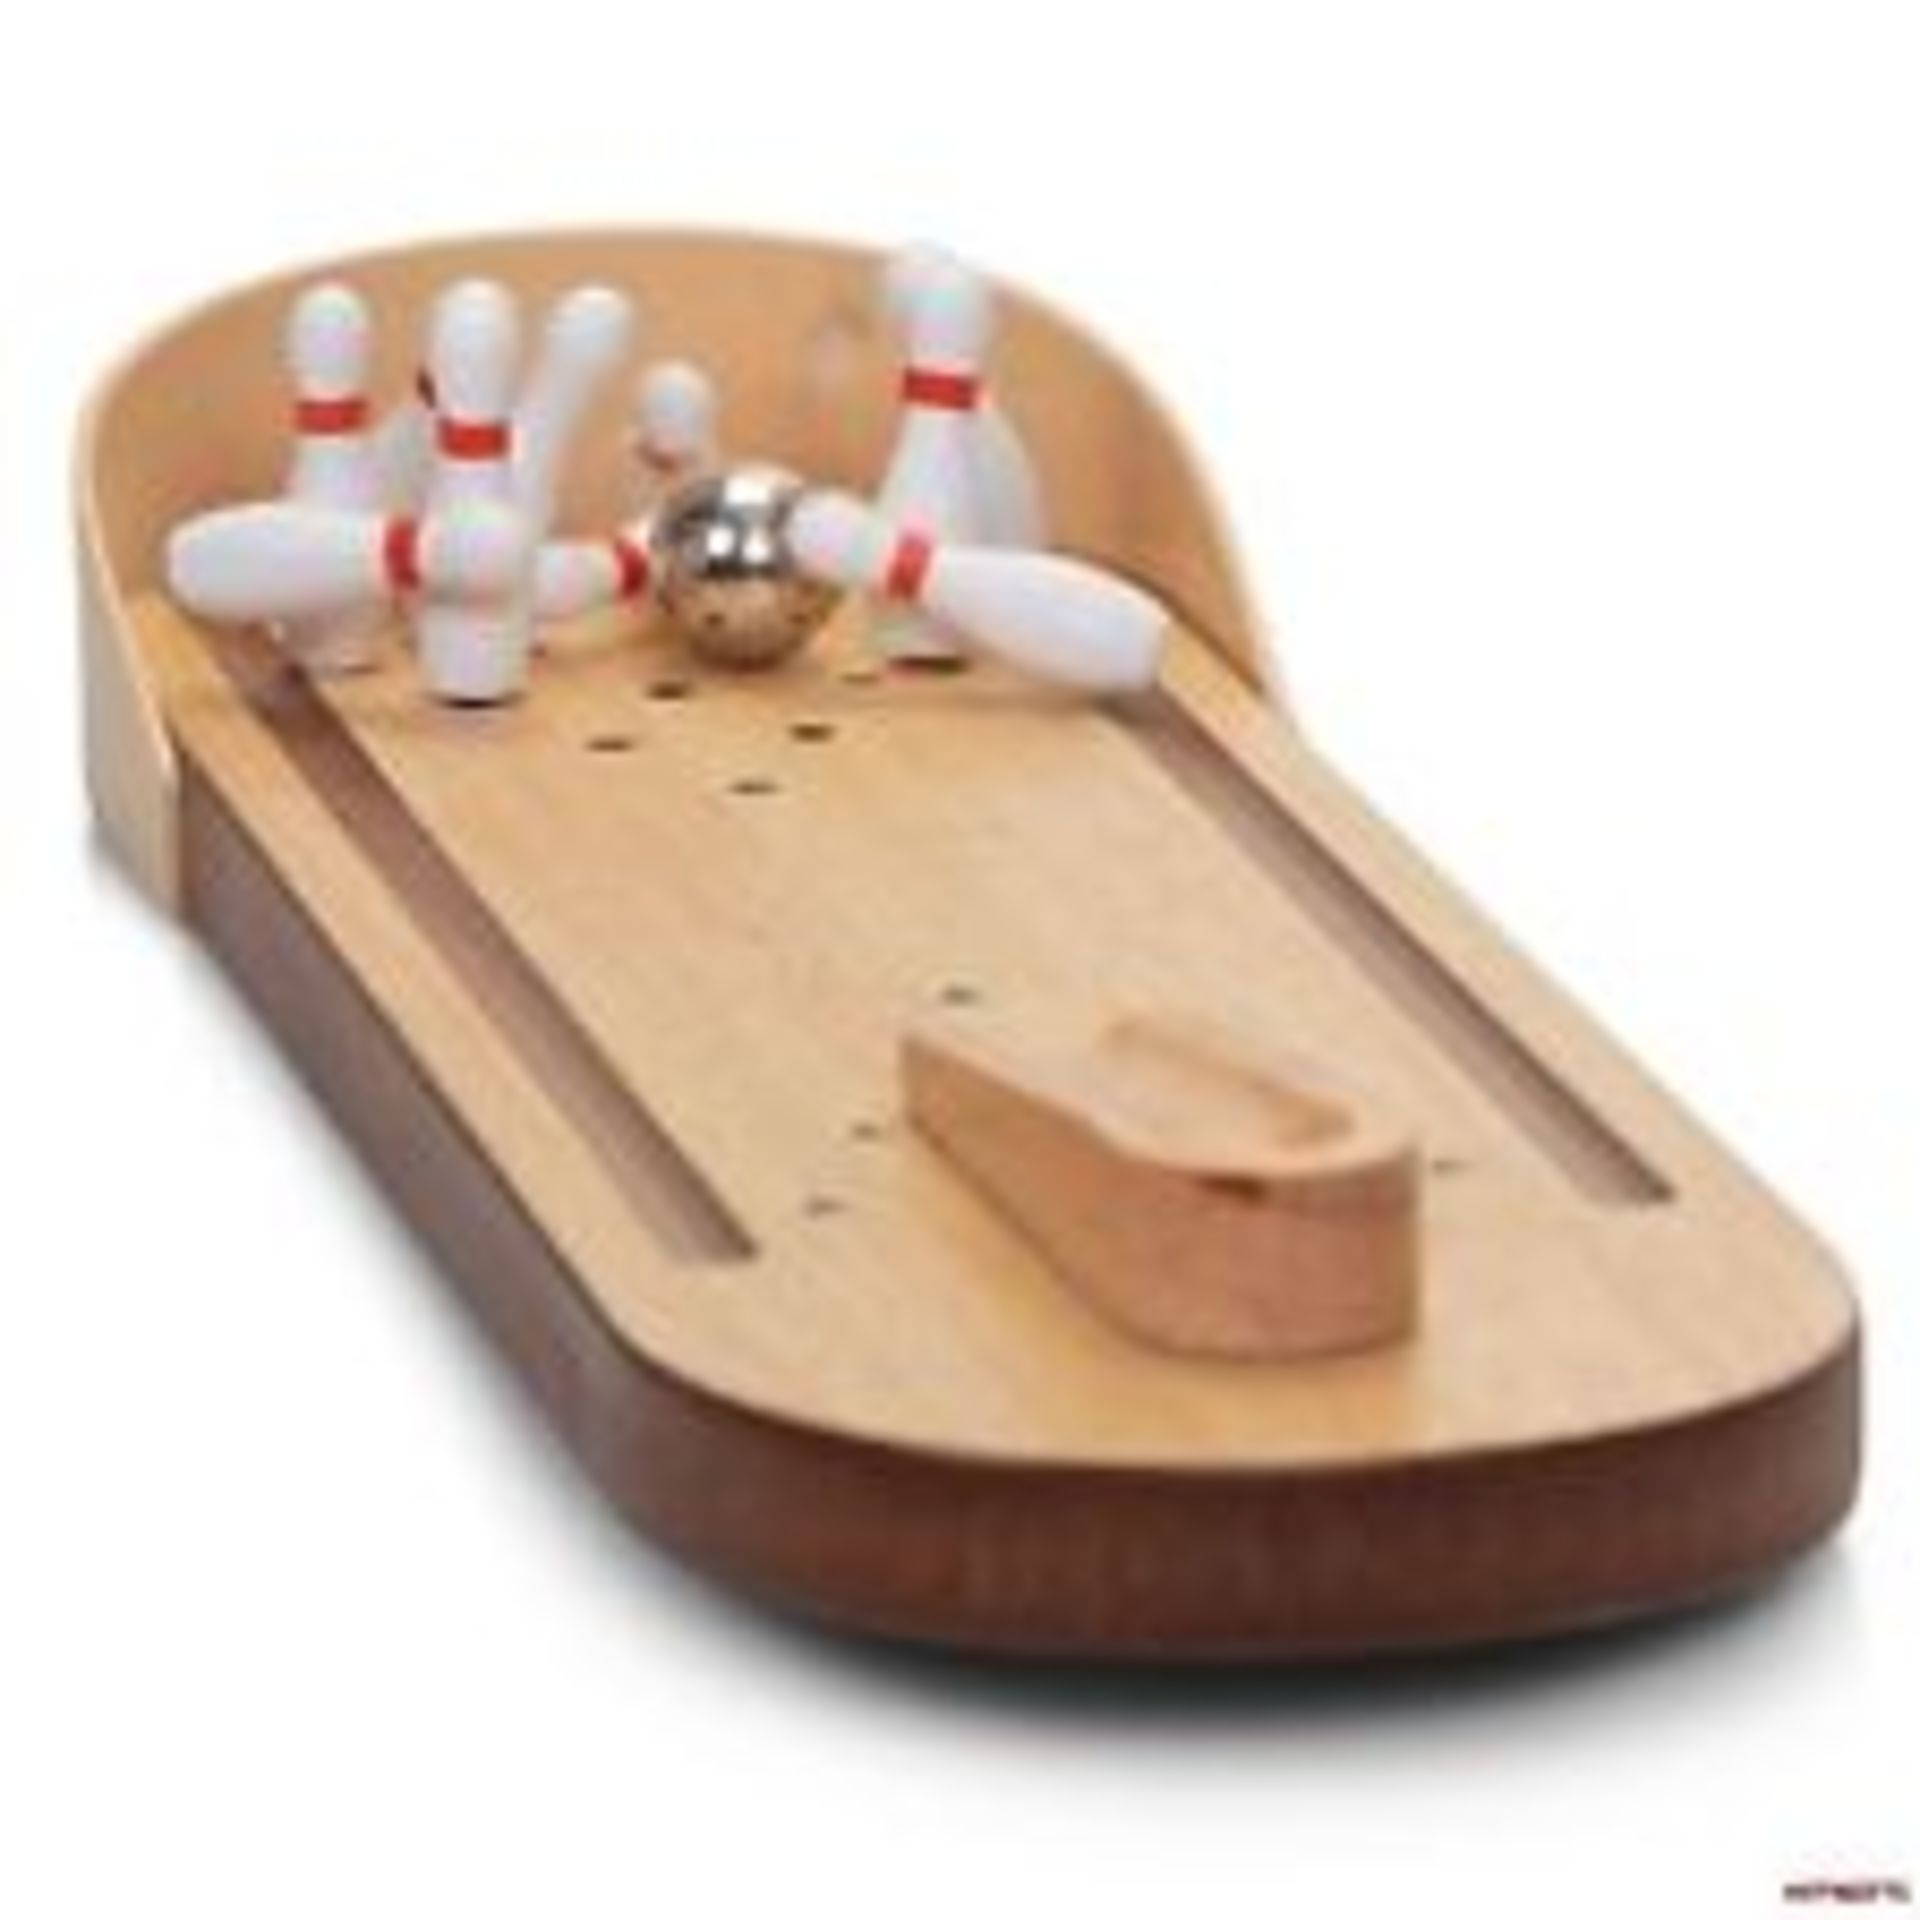 V Brand New Ten Pin Bowling Alley Game X 2 YOUR BID PRICE TO BE MULTIPLIED BY TWO